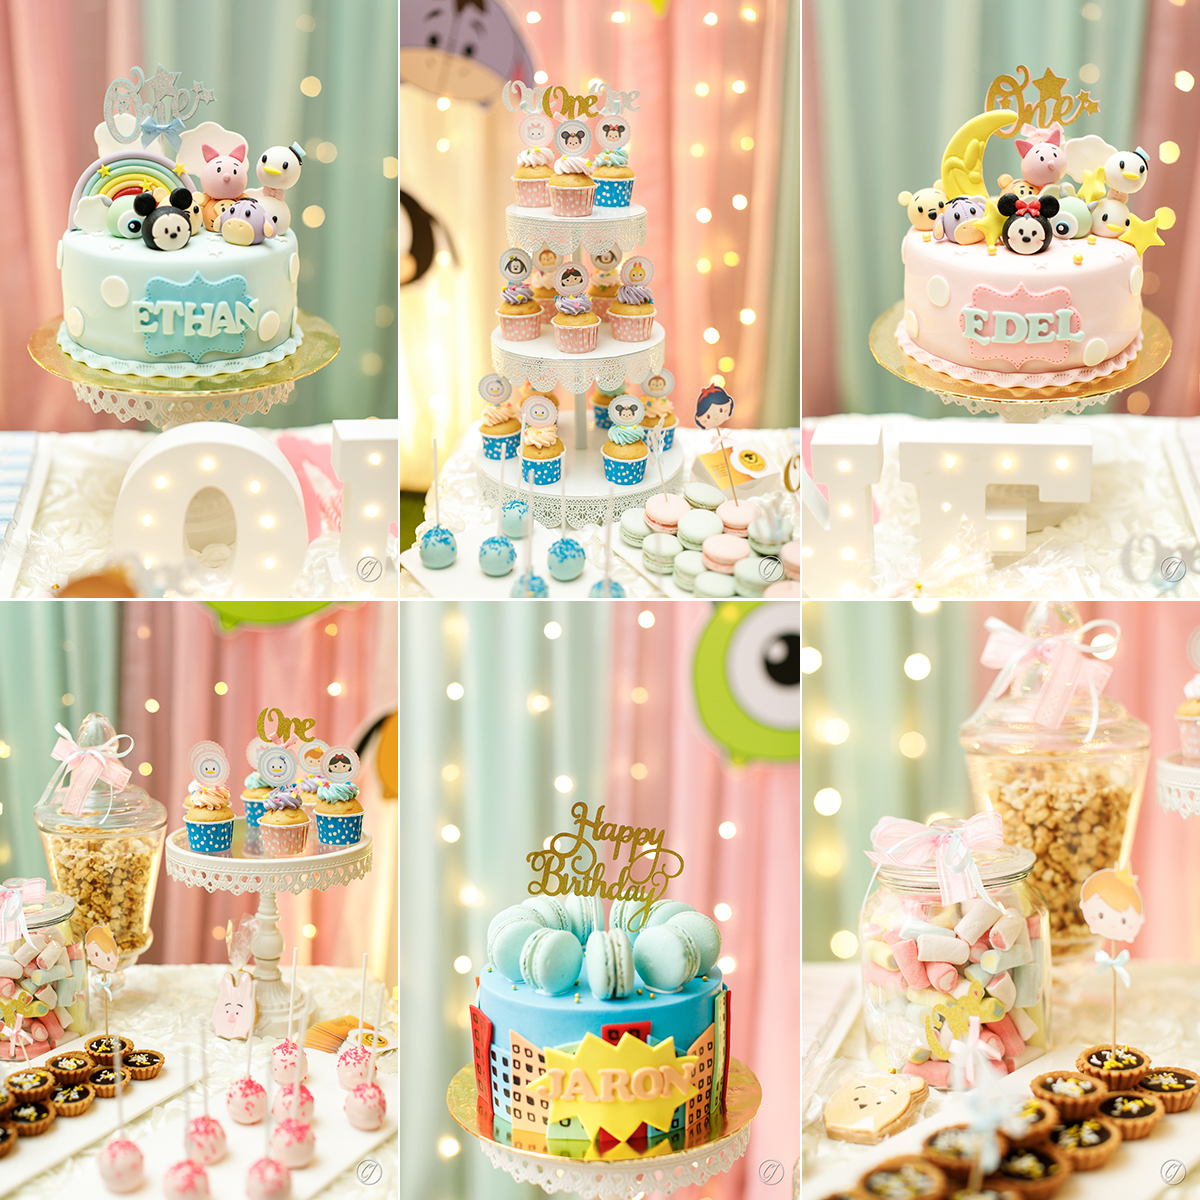 Cakes and decoration by D'Pastry Melaka